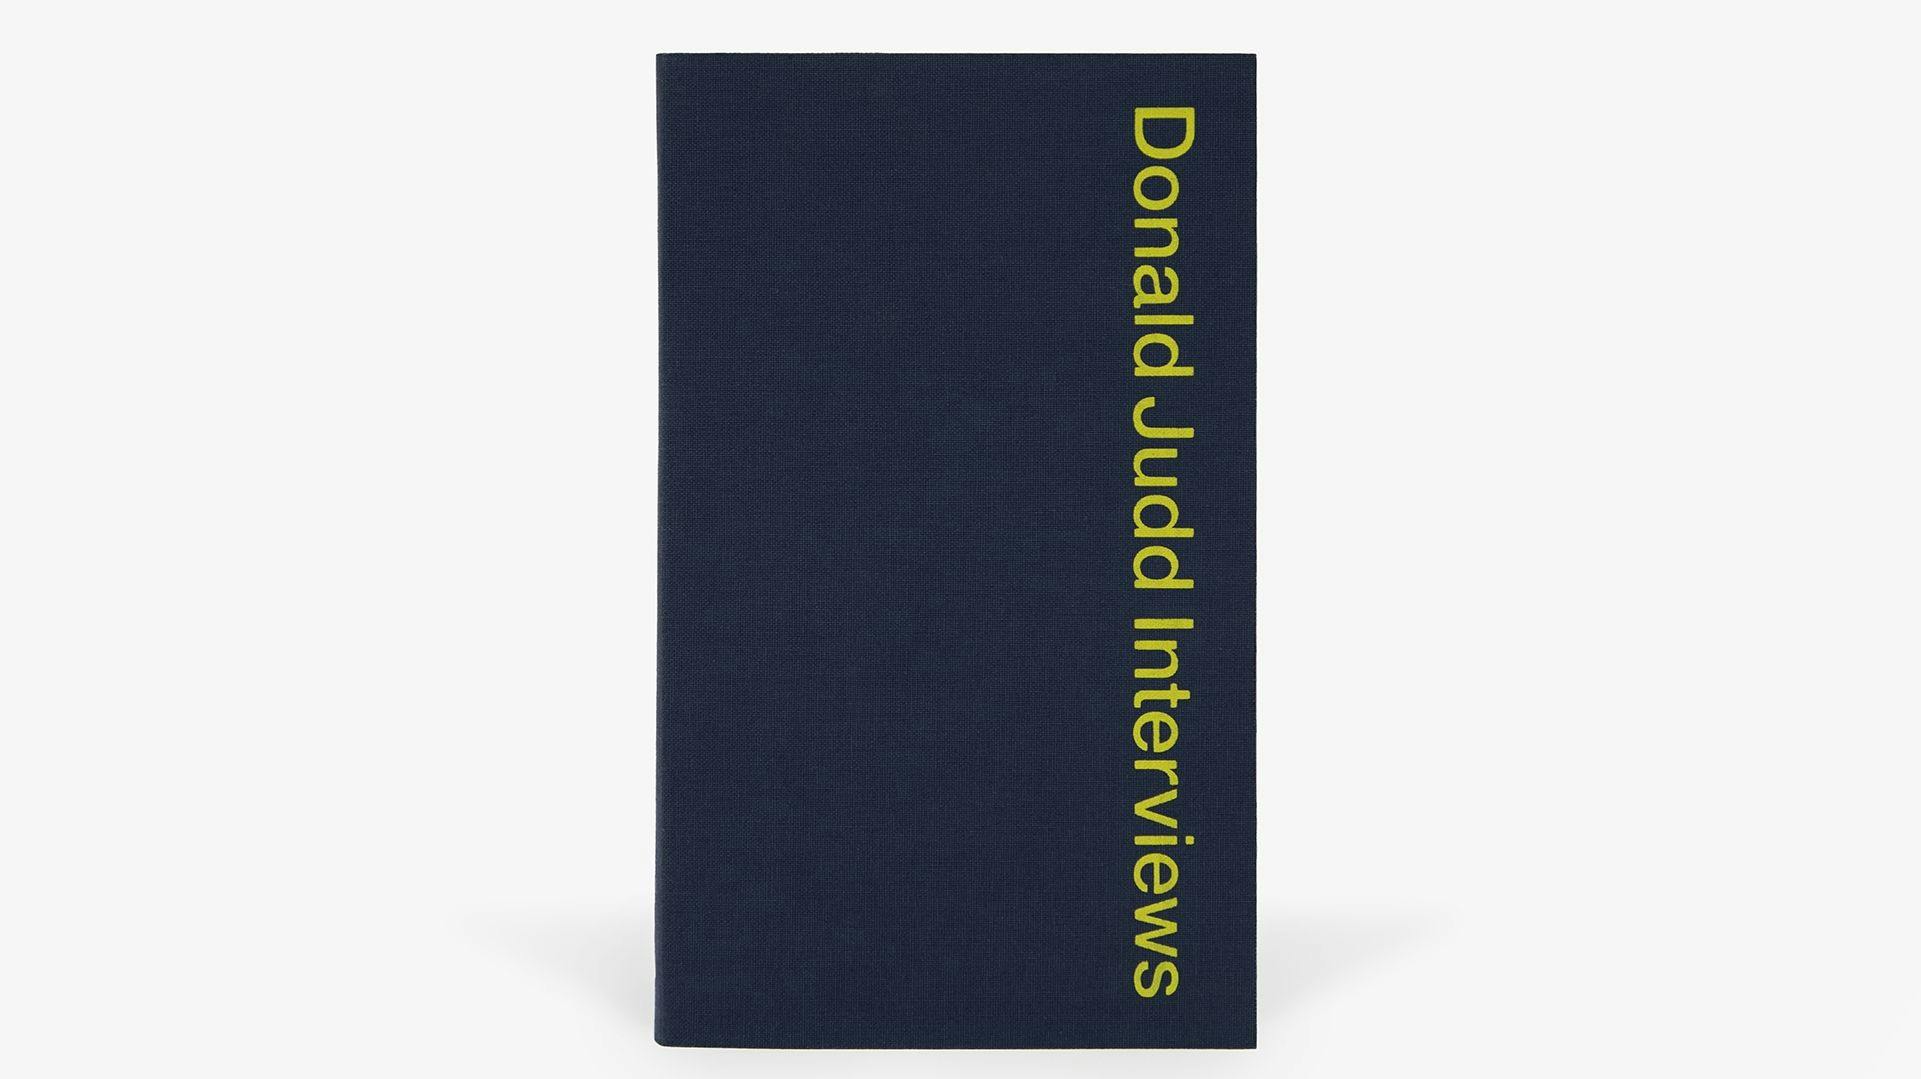 A photograph of the cover of the book, titled Donald Judd Interviews, dated 2019.